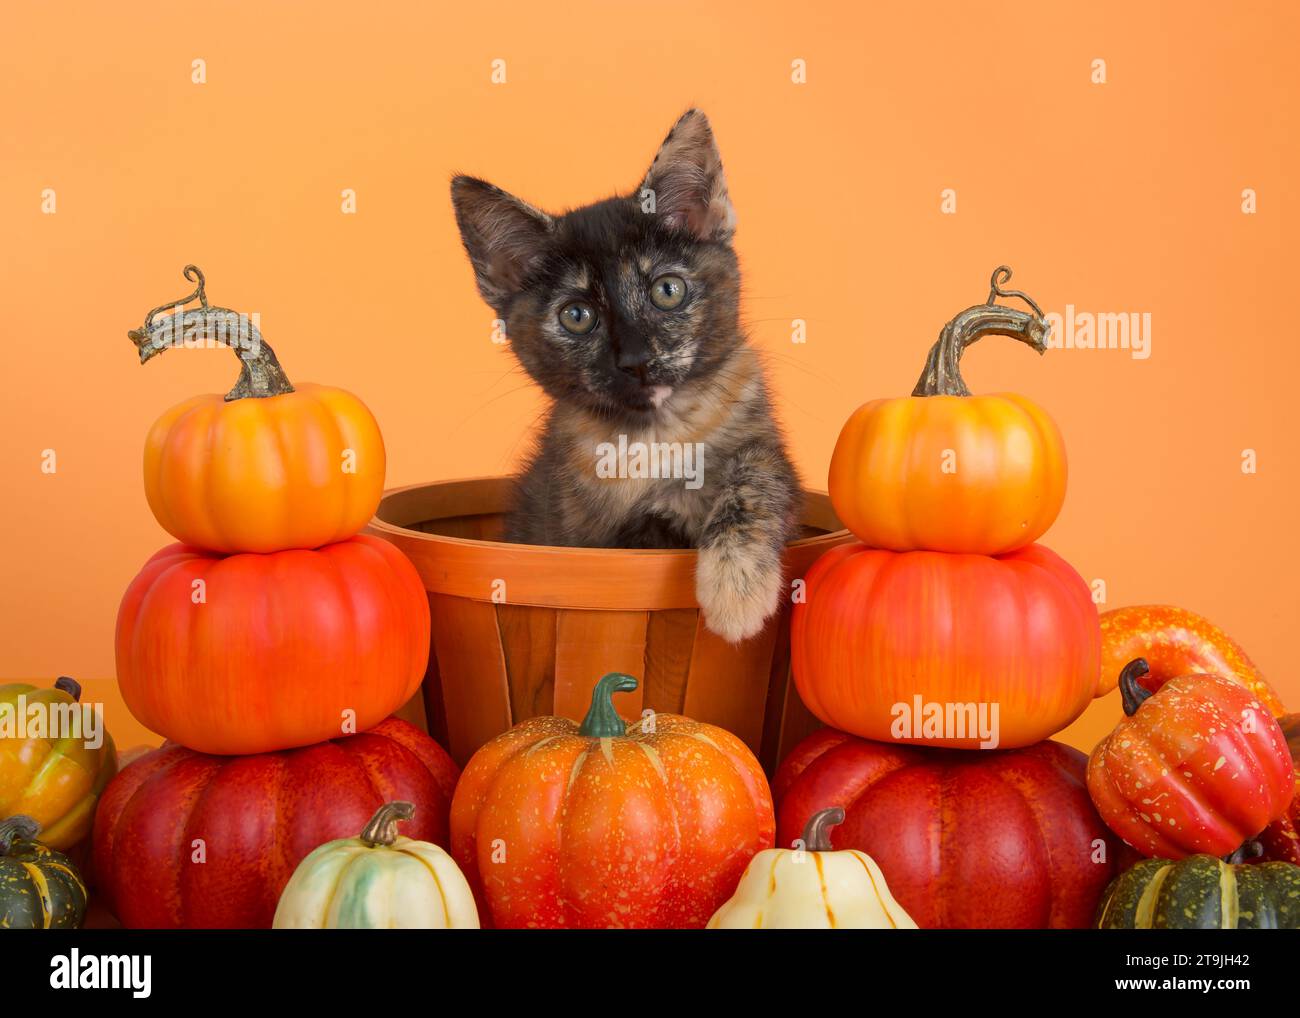 Adorable Calico Tabby, or Caliby kitten sitting in an orange wicker basket surrounded by piles of miniature pumpkins. Kitten looking directly at viewe Stock Photo